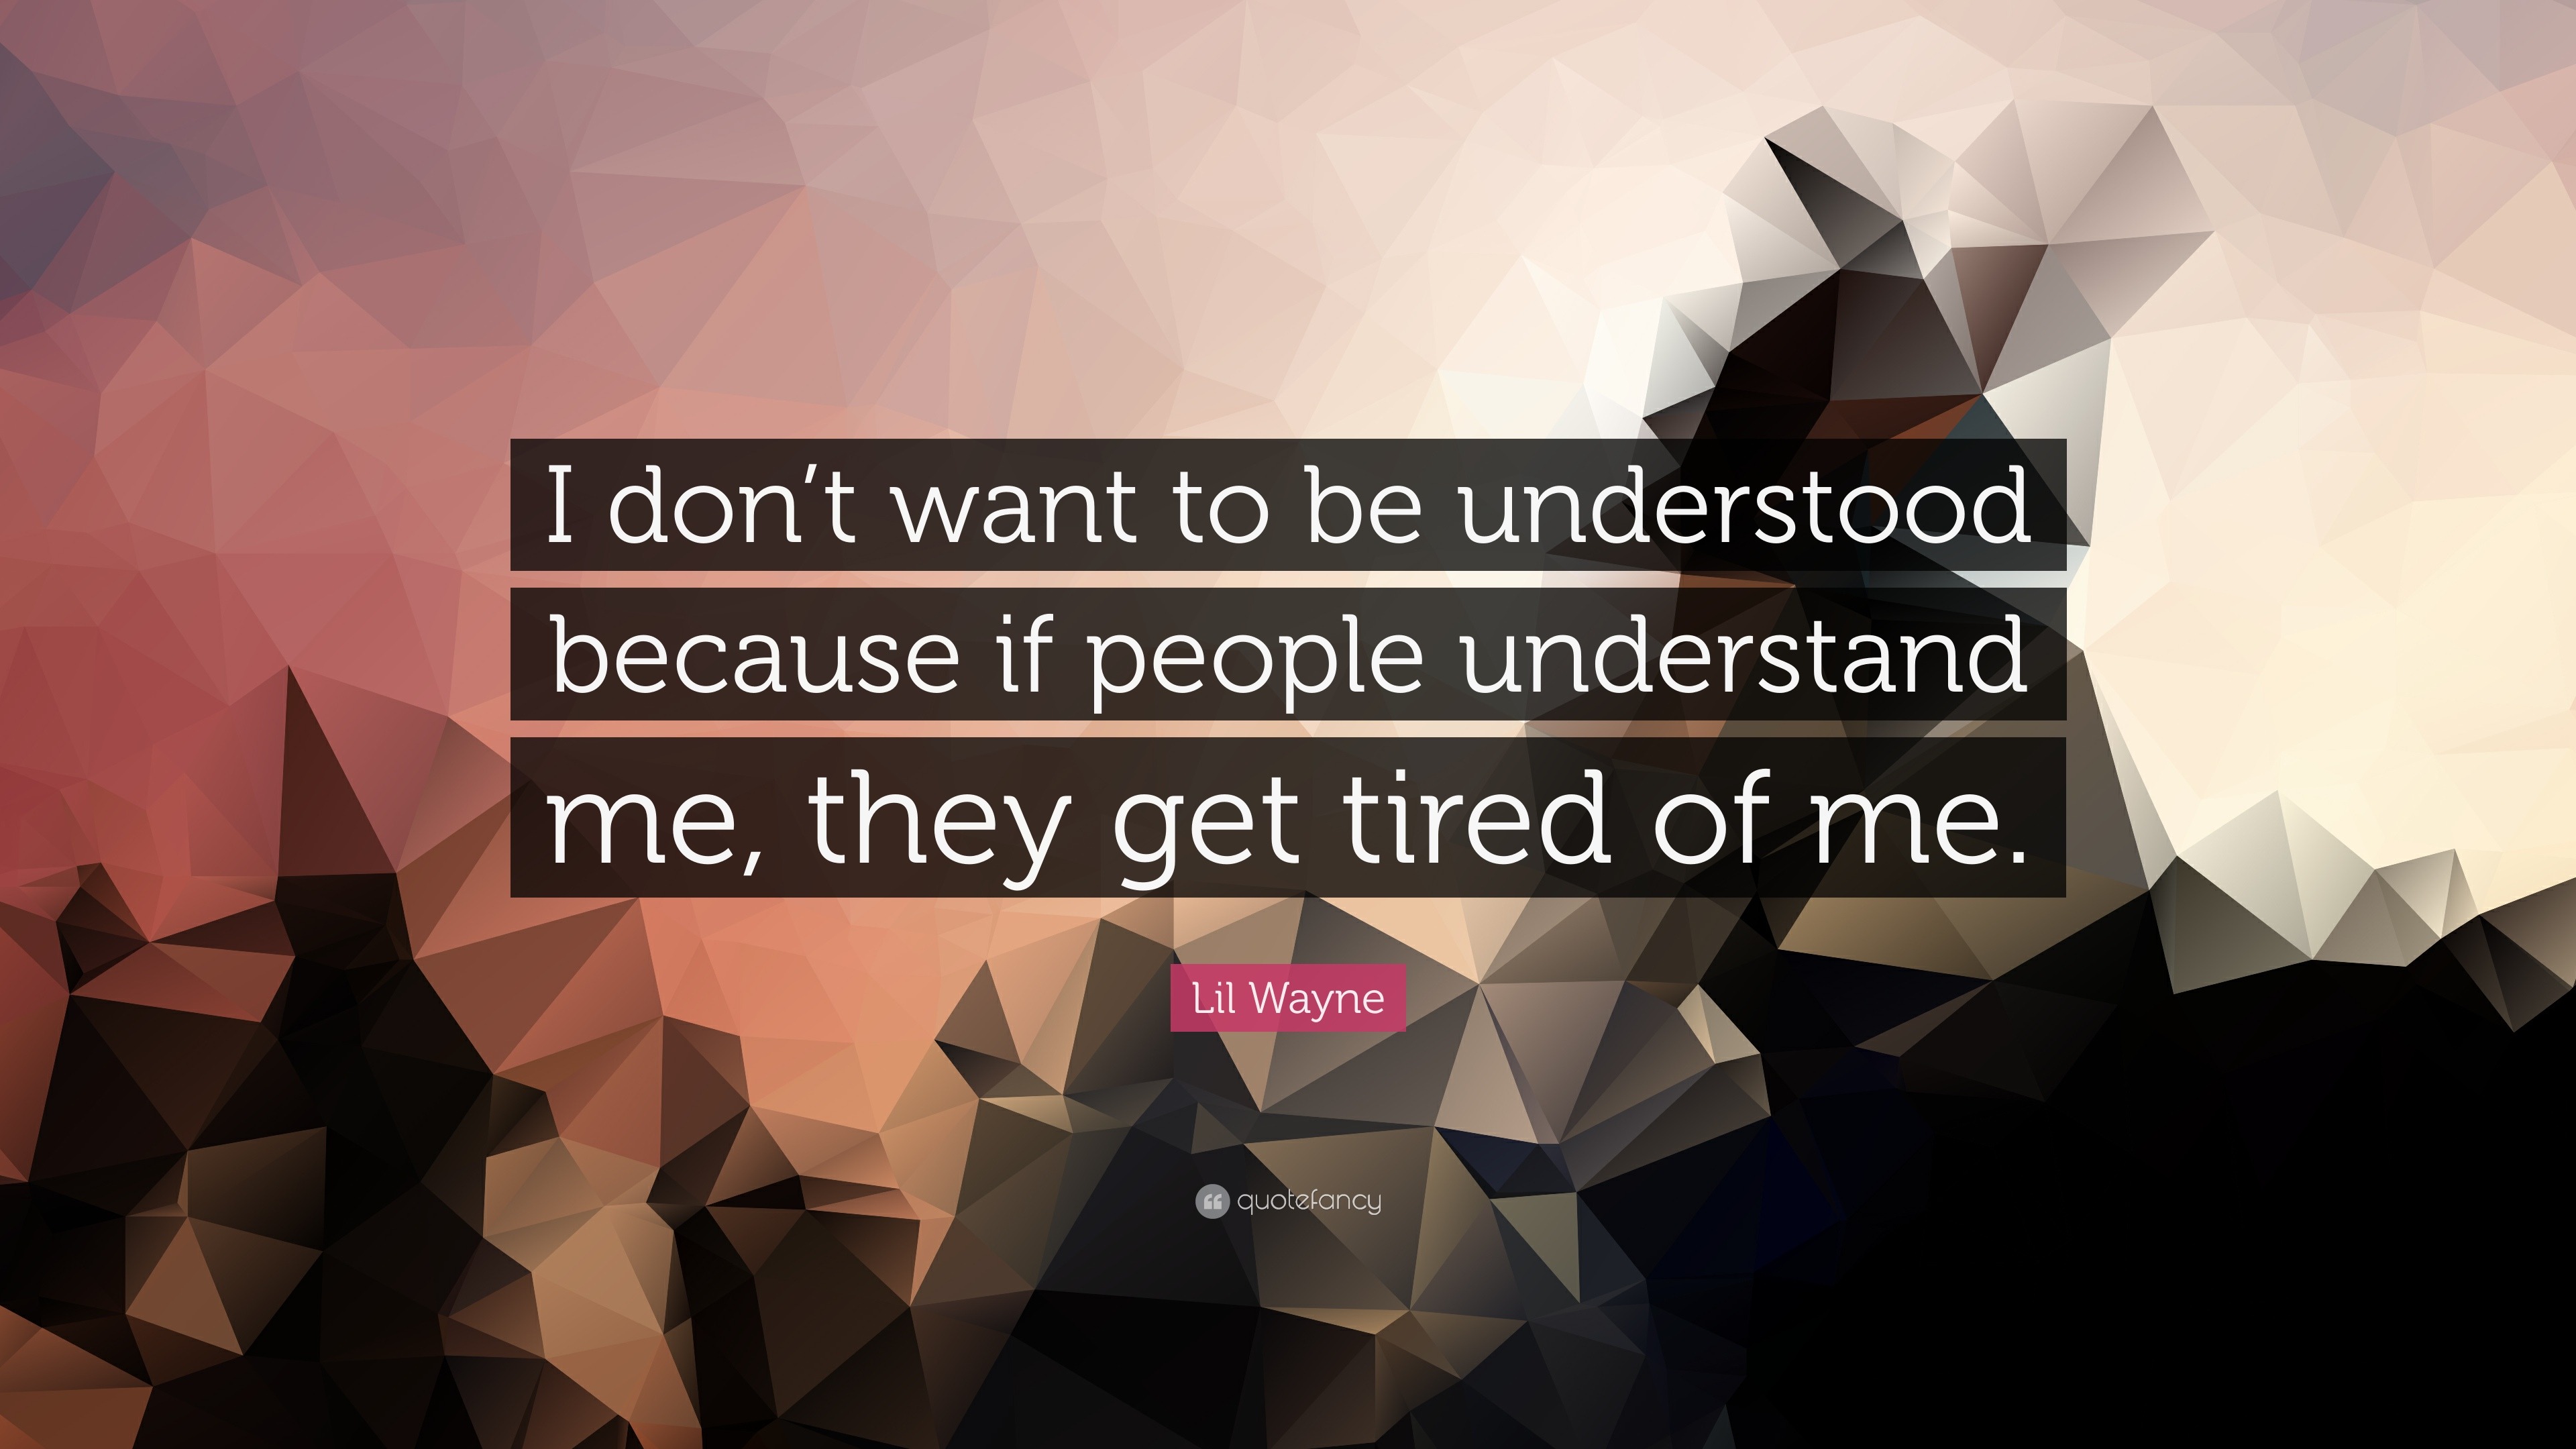 Lil Wayne Quote “I don t want to be understood because if people